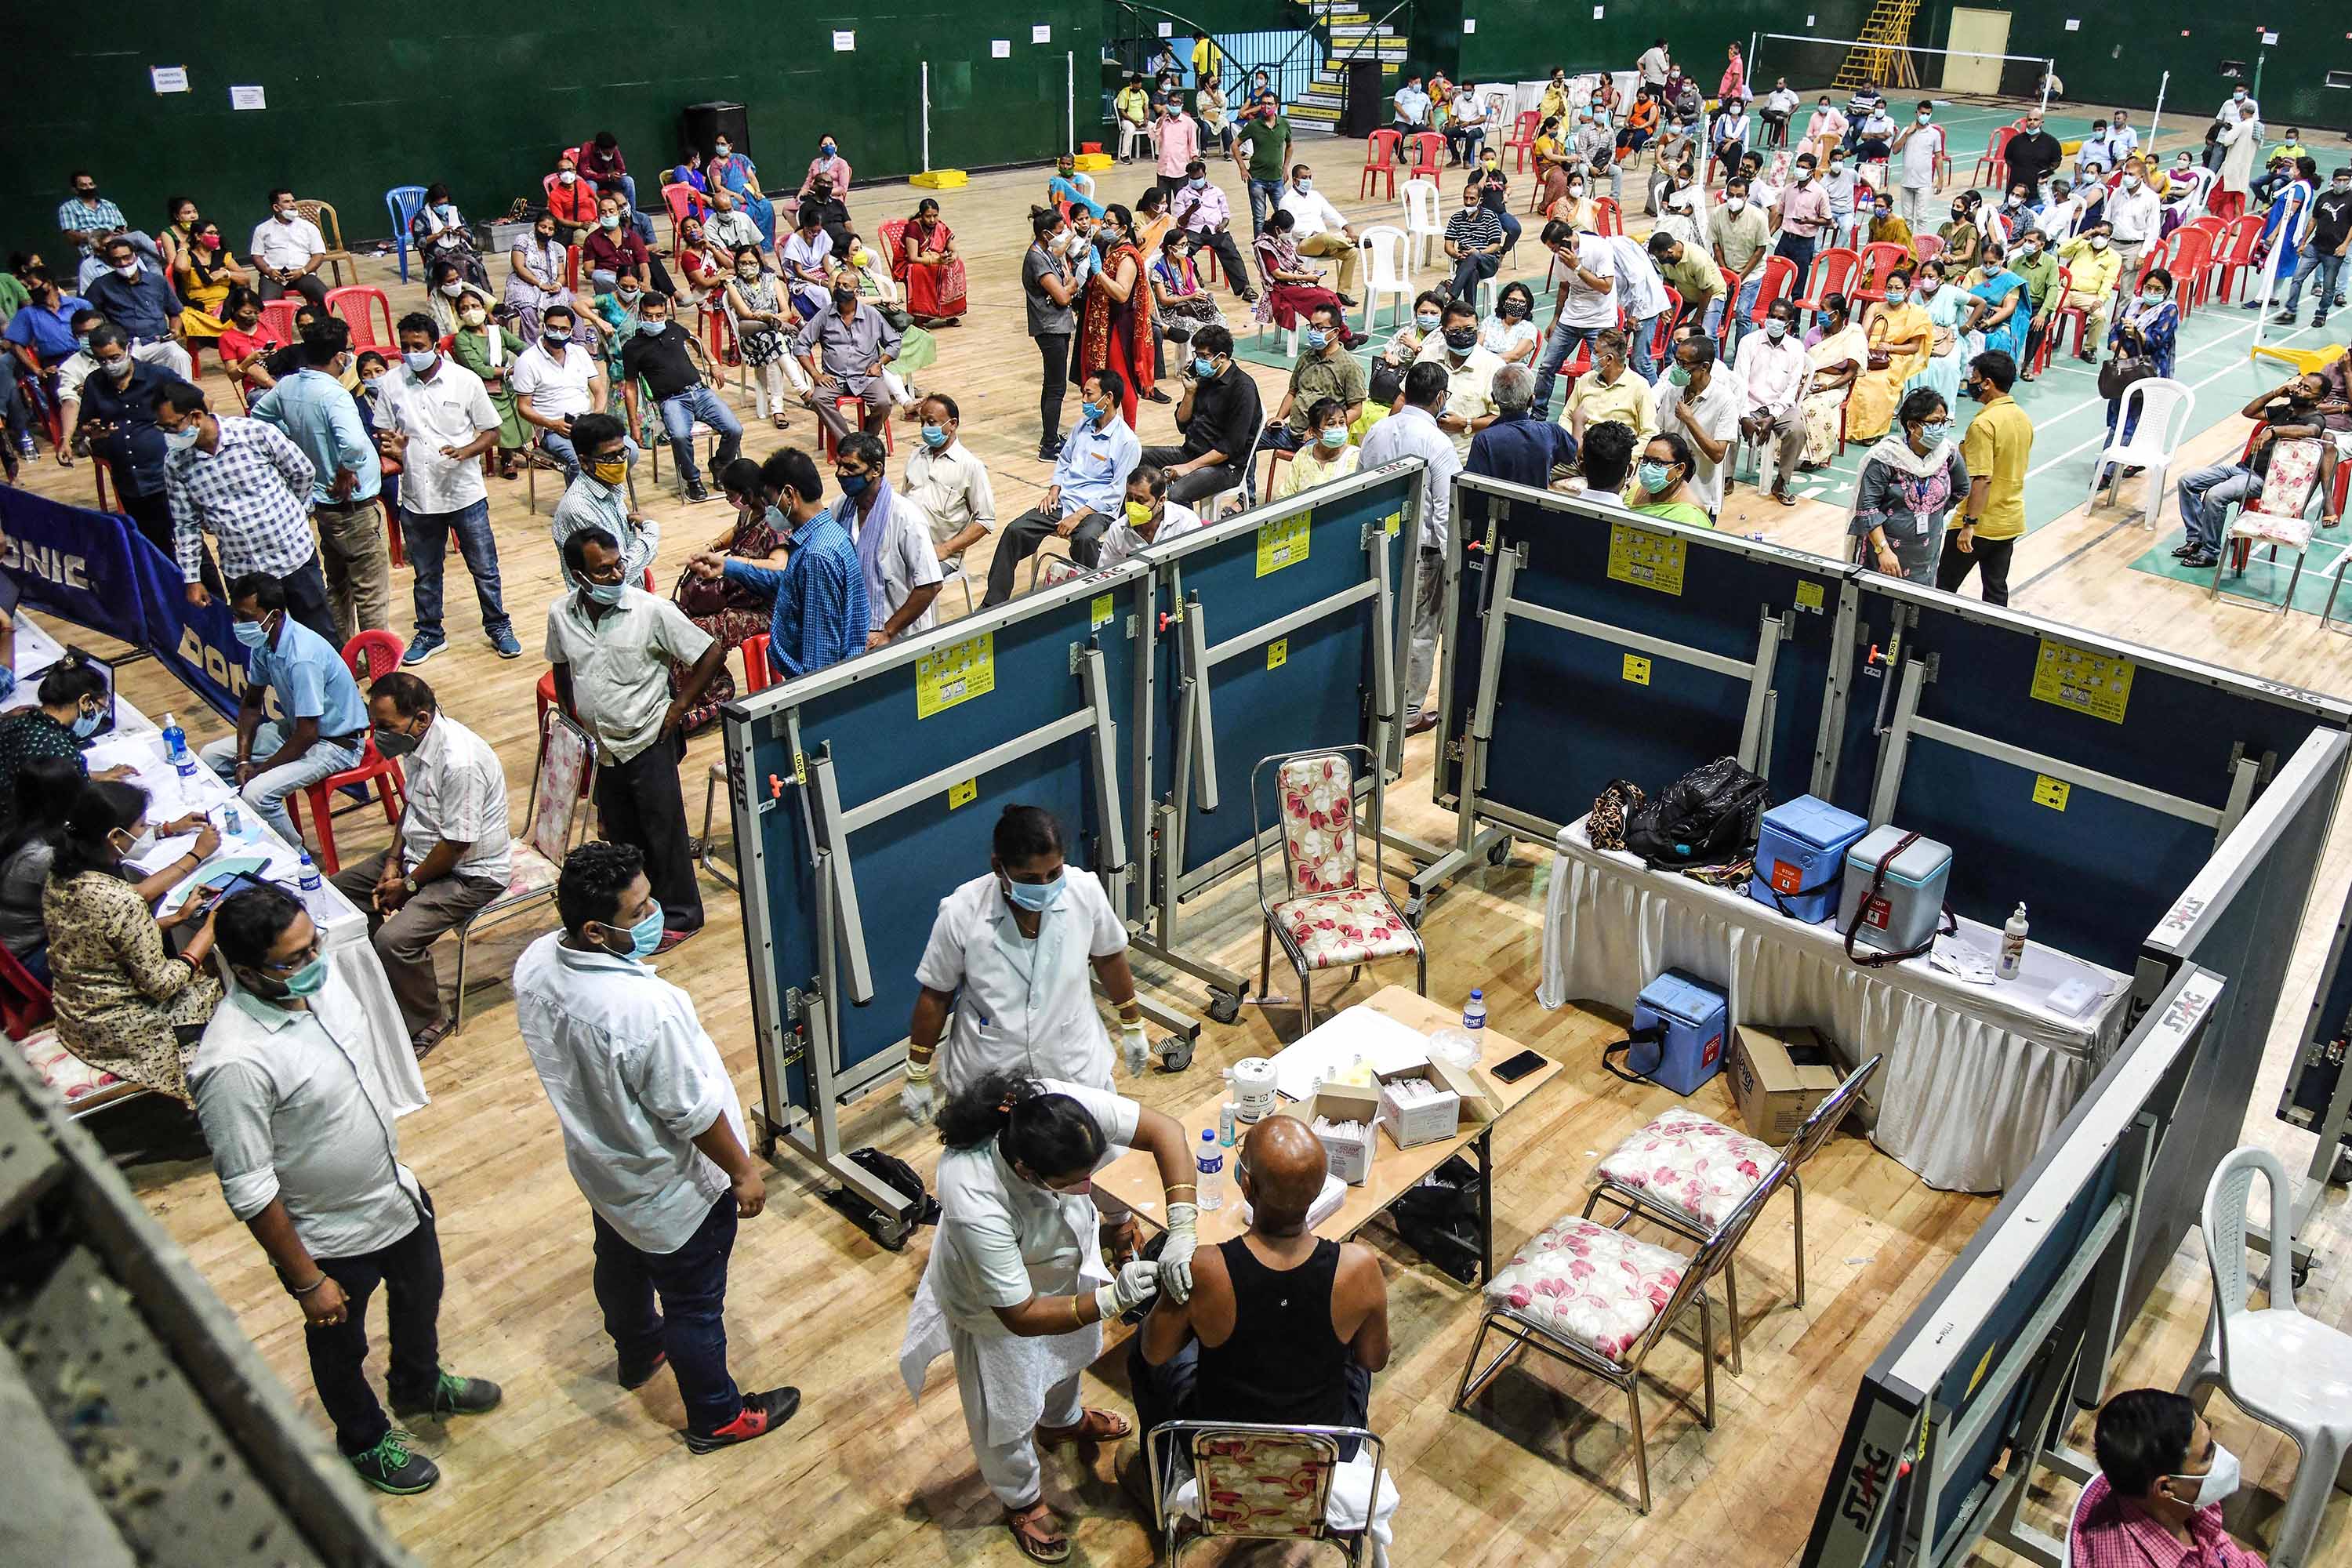 Vaccinations are carried out at an indoor stadium in Guwahati, India, on April 22. 